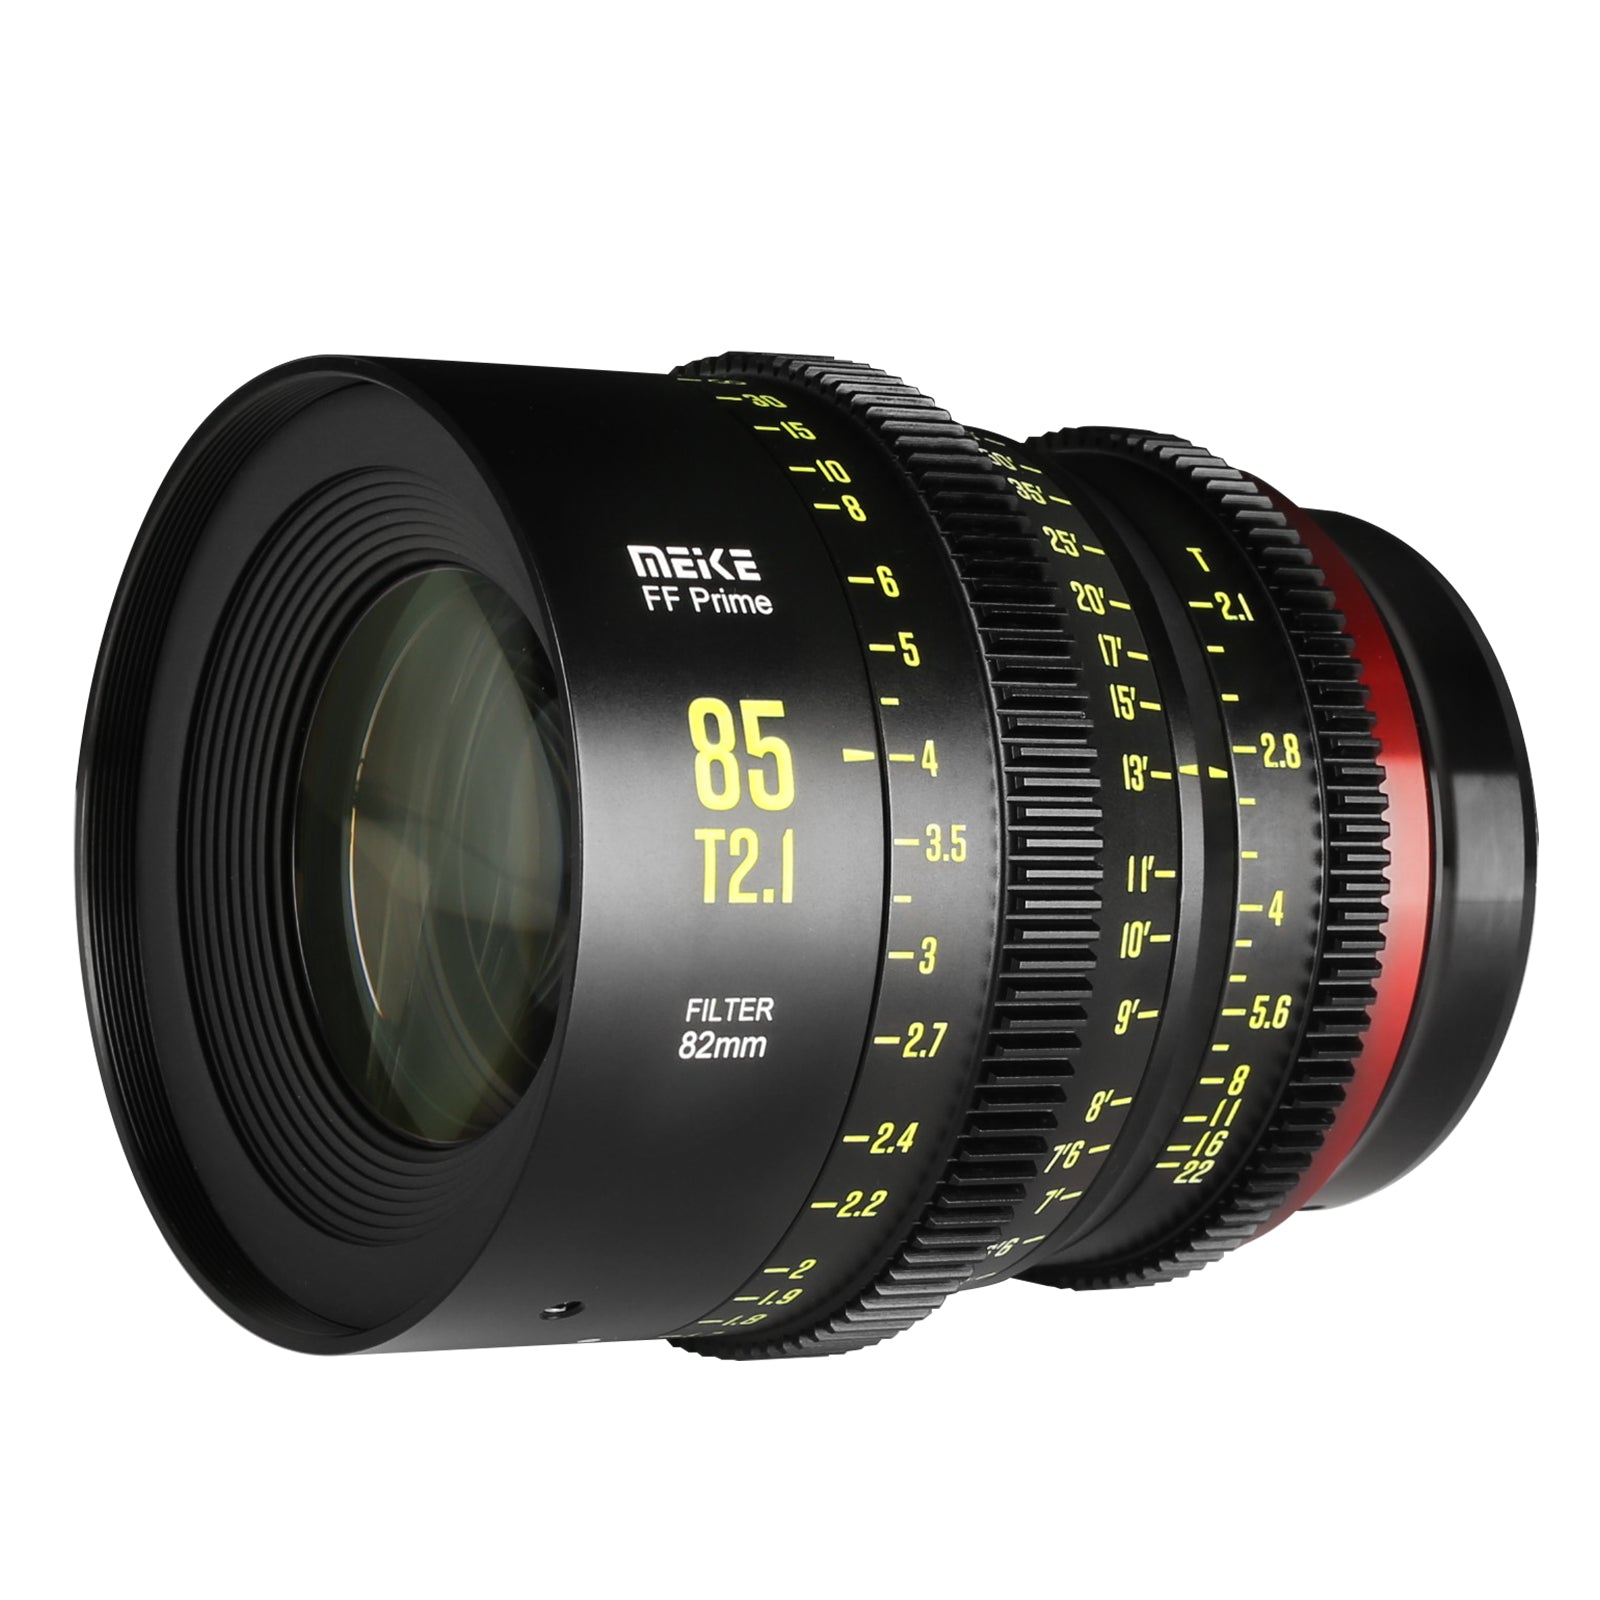 Meike Cinema Full Frame Cinema Prime 85mm T2.1 Lens (Canon RF Mount) in a Front-Side View